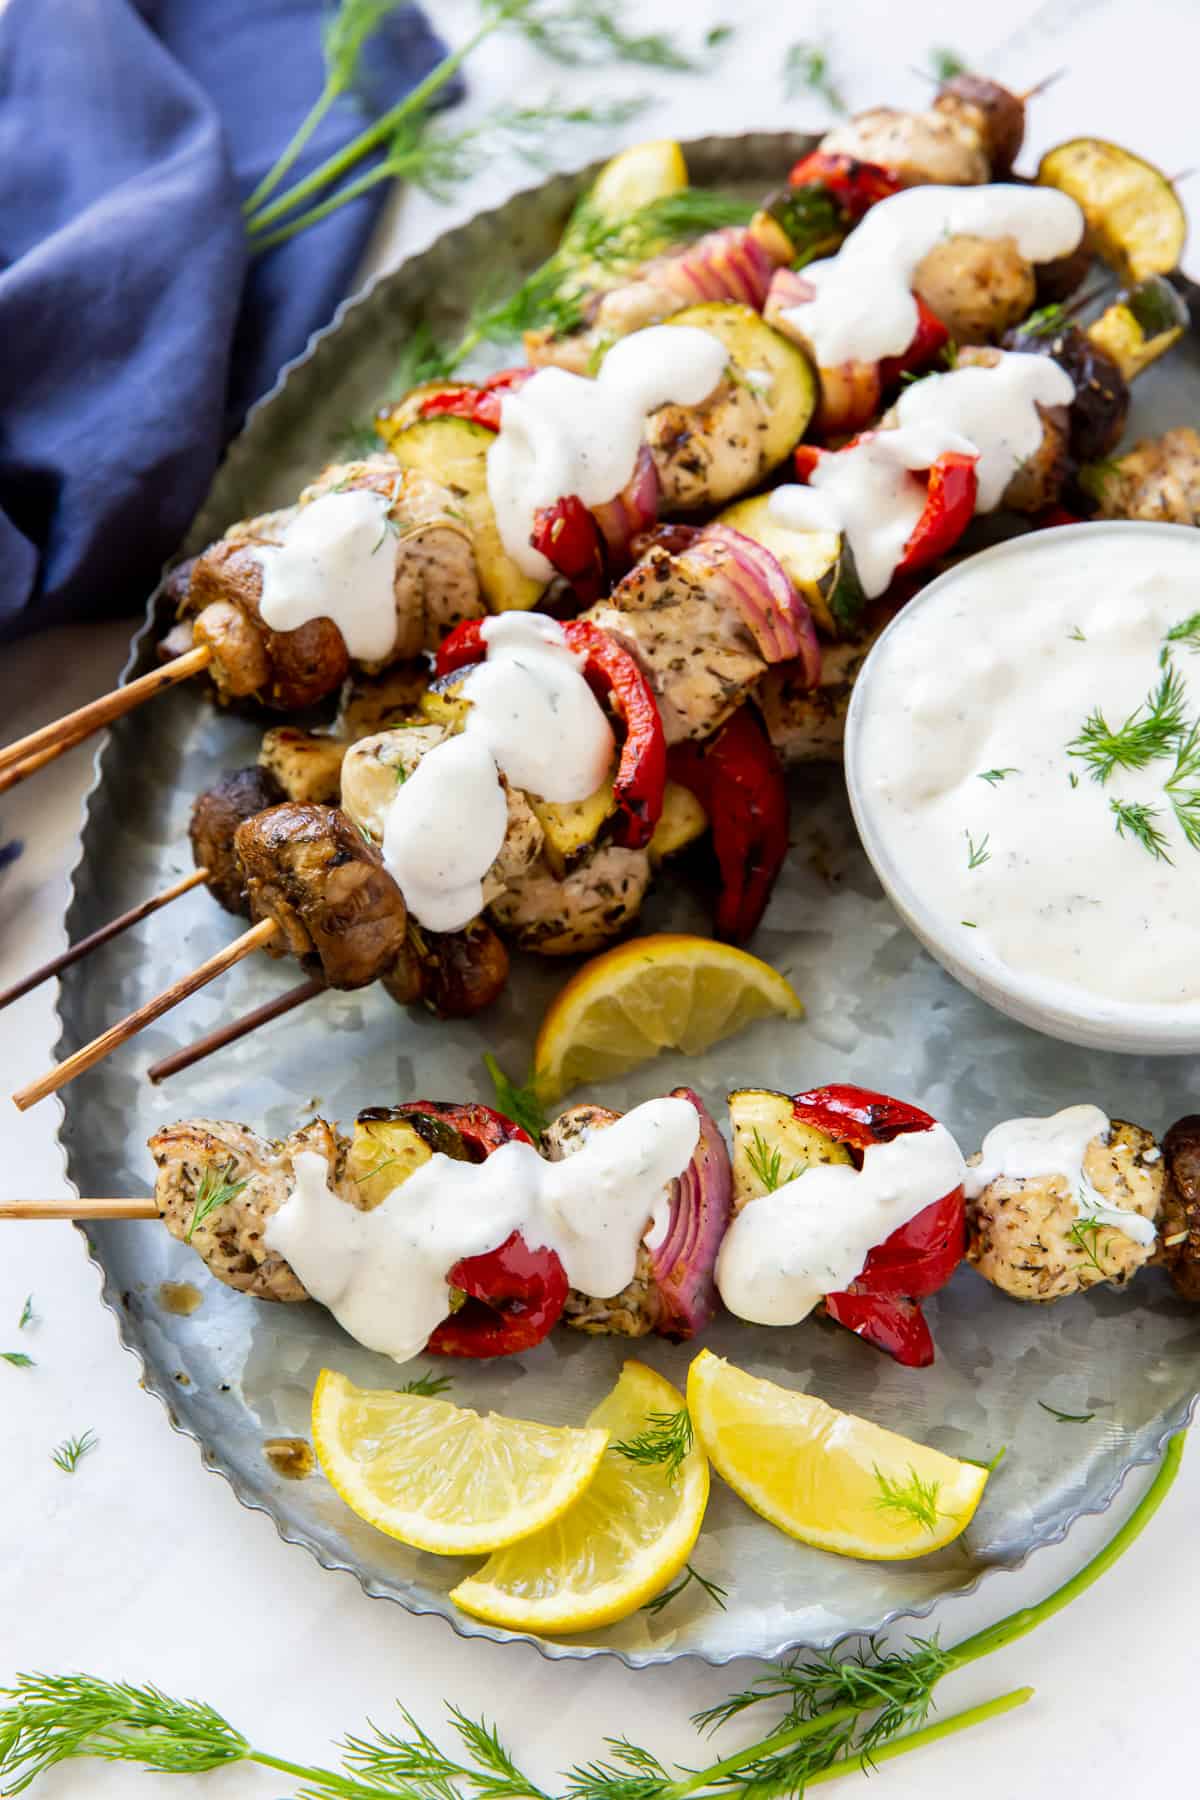 Chicken kabobs with Feta Dill Sauce spooned over the top.